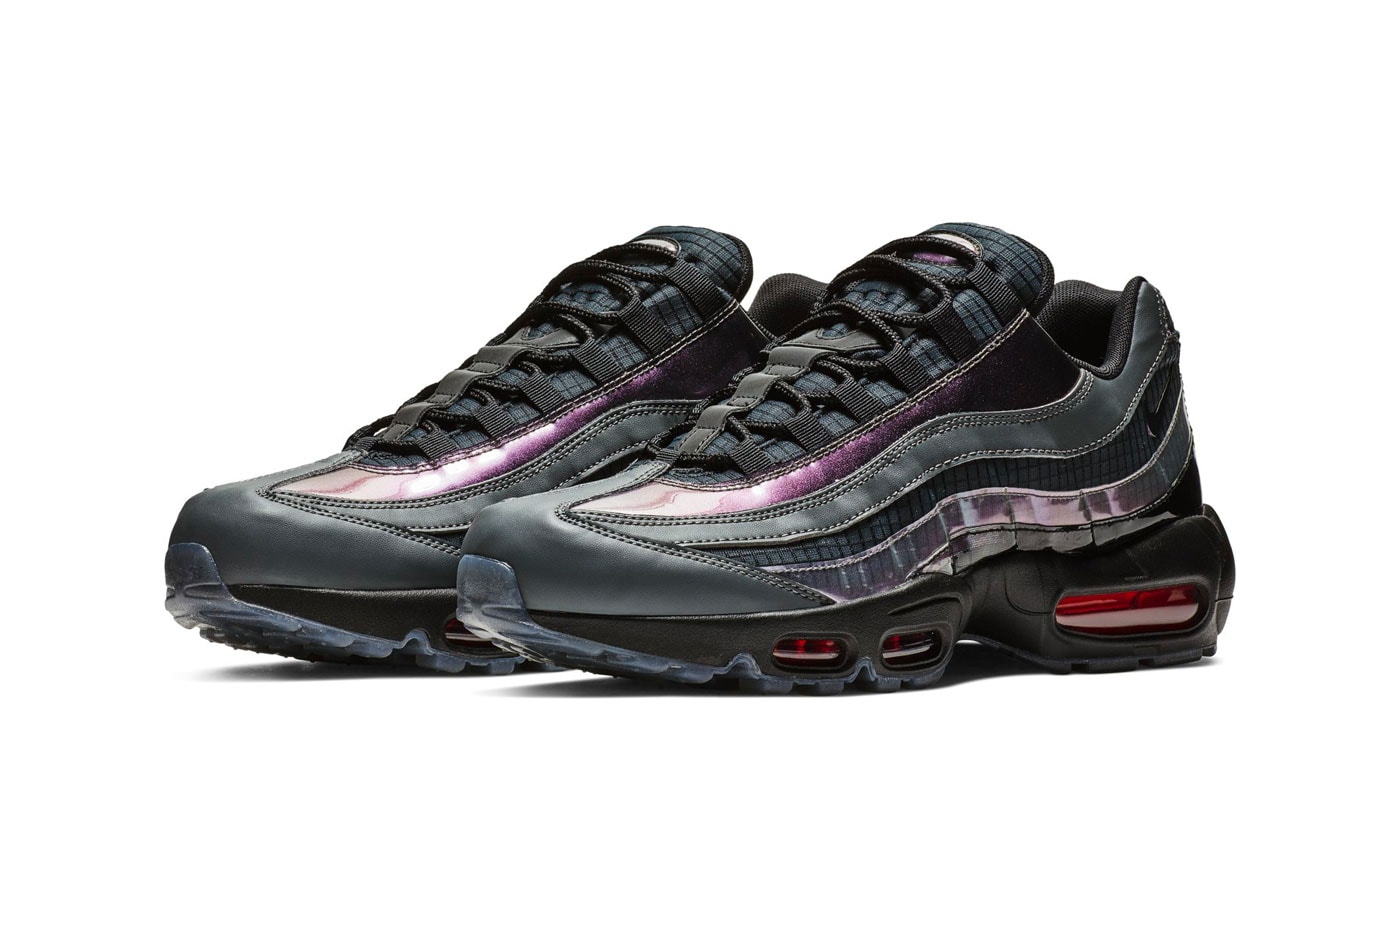 Nike Air Max 95 Black Amber Glow Release Date december 2018 sneaker iridescent space pink red AO2450-001